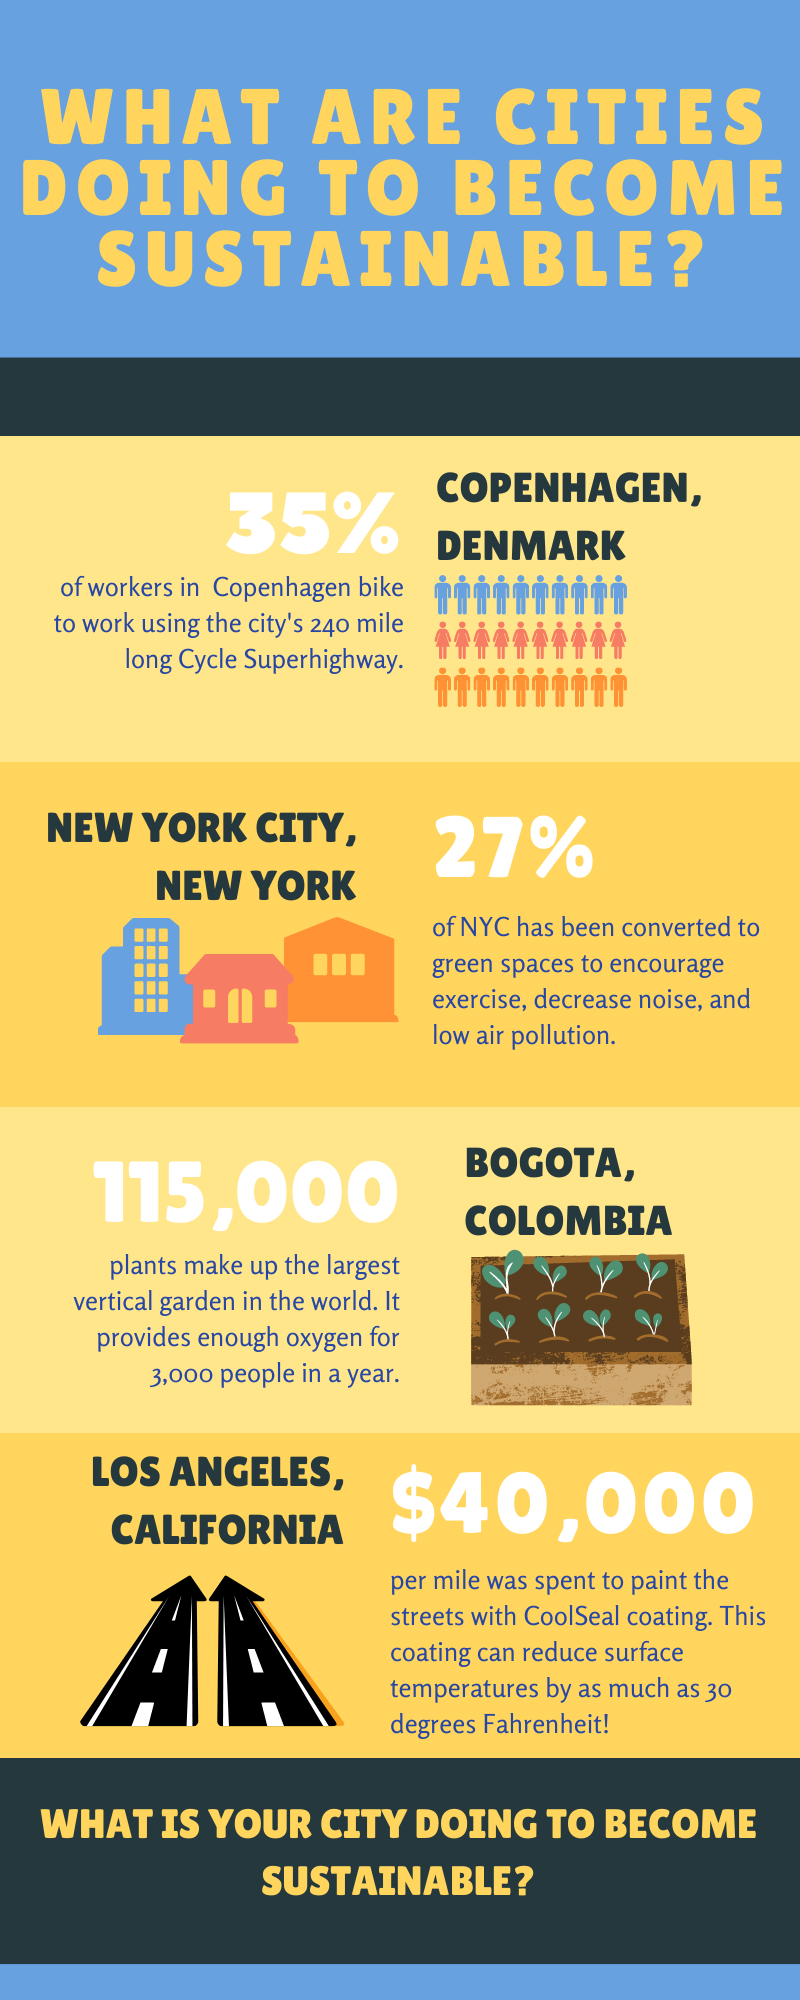 infographic showing what cities are doing to become sustainable. Los Angeles, New York City, Copenhagen, Bogota